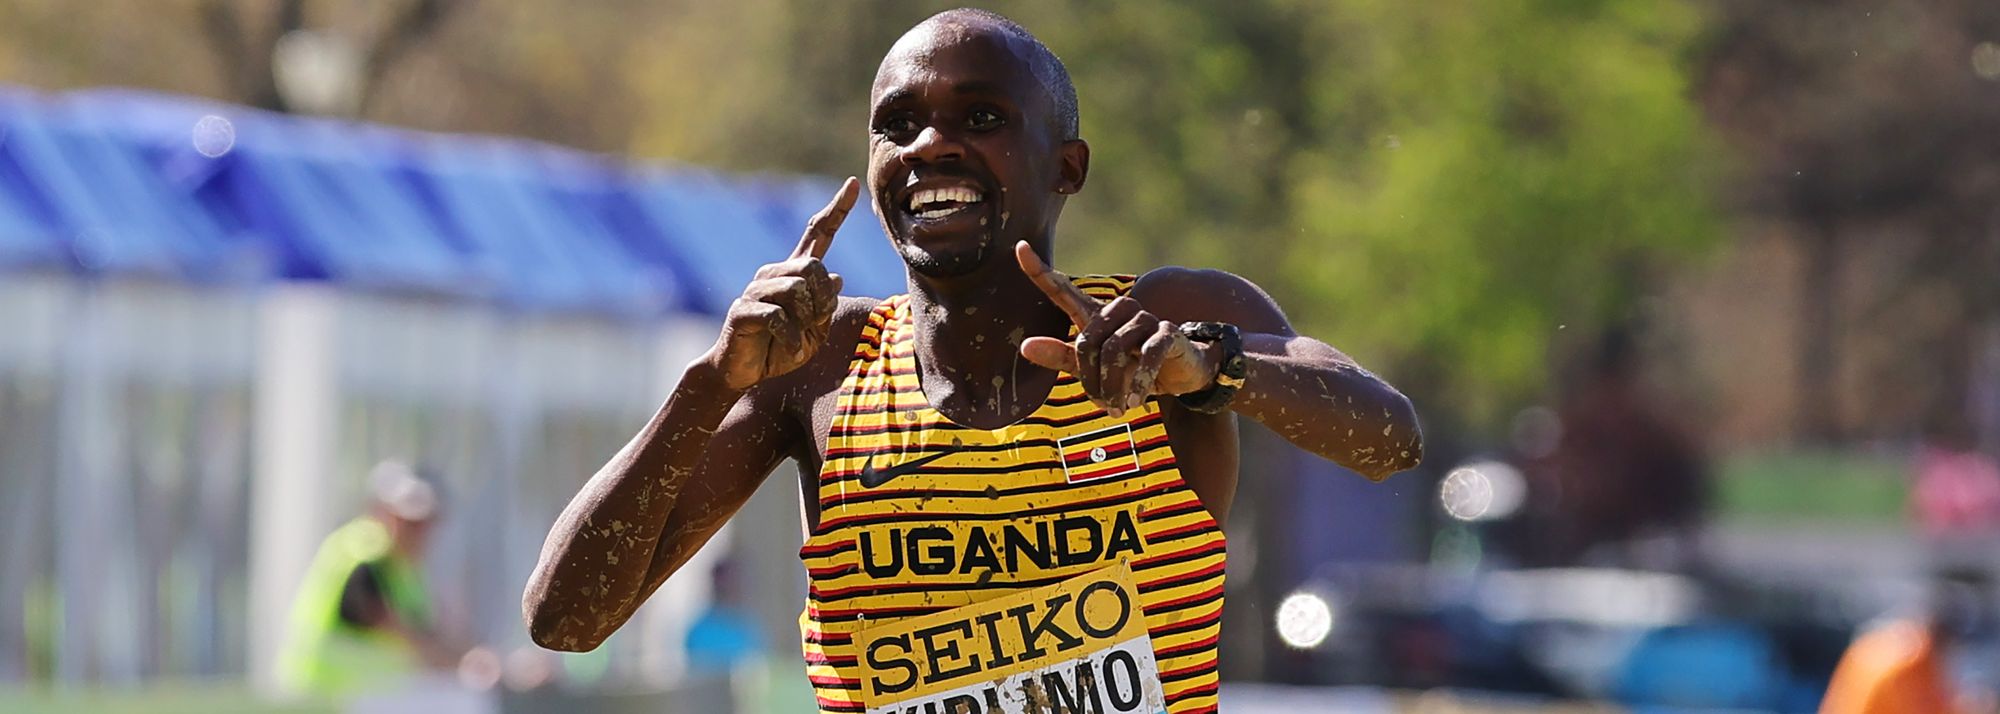 Jacob Kiplimo joined an illustrious list of athletes to have successfully defended a world cross-country title